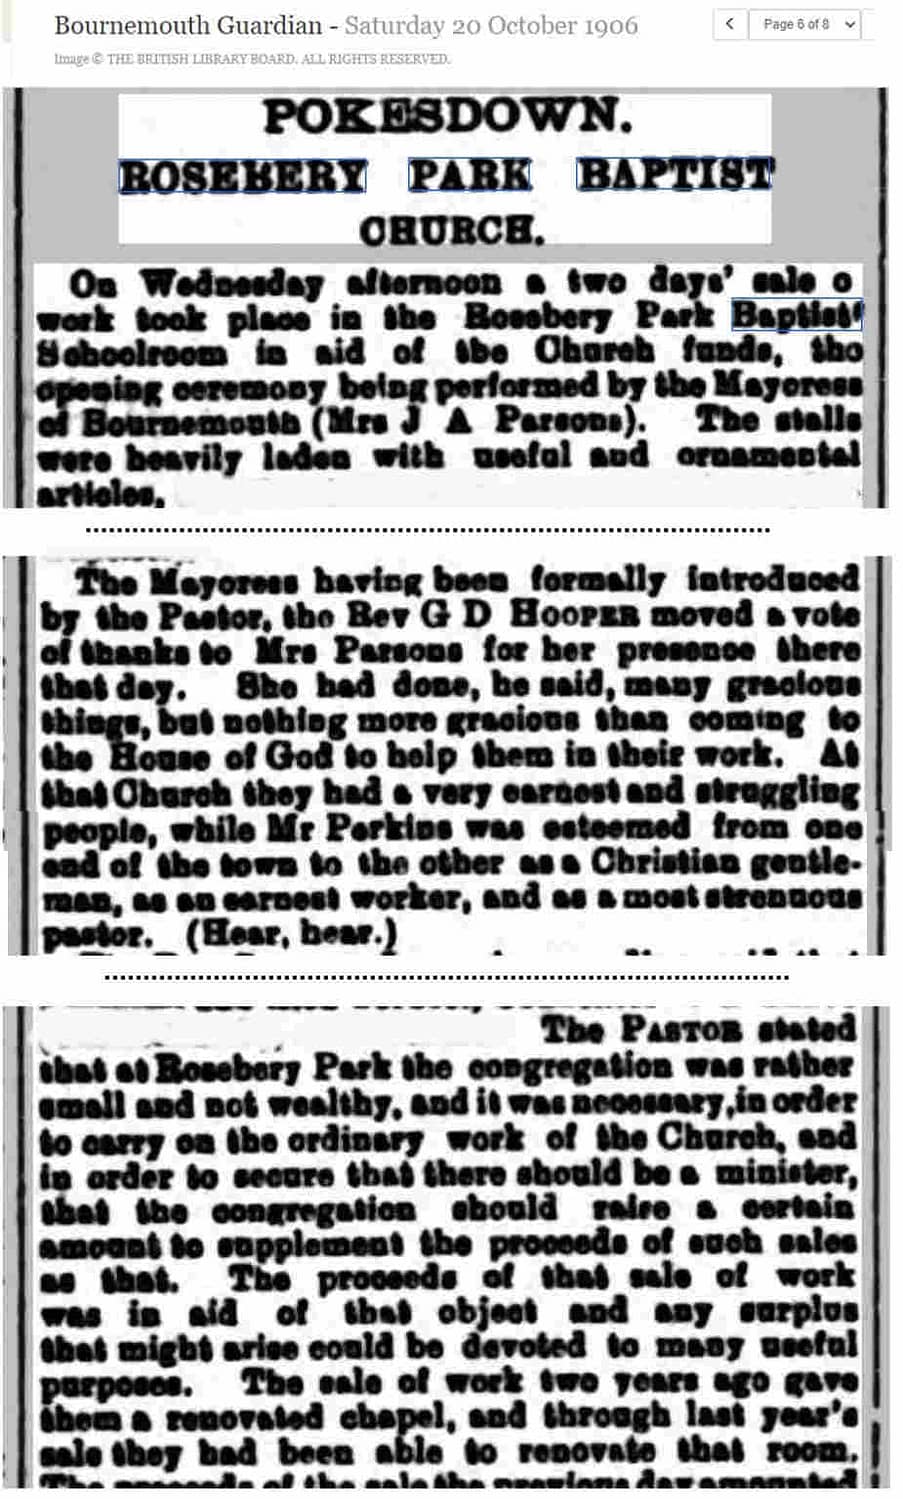 article in the 1906 Bournemouth Guardian about the sale of work at Rosebery Park Baptist describing Mr Perkins as esteemed from one end of the town to the other.